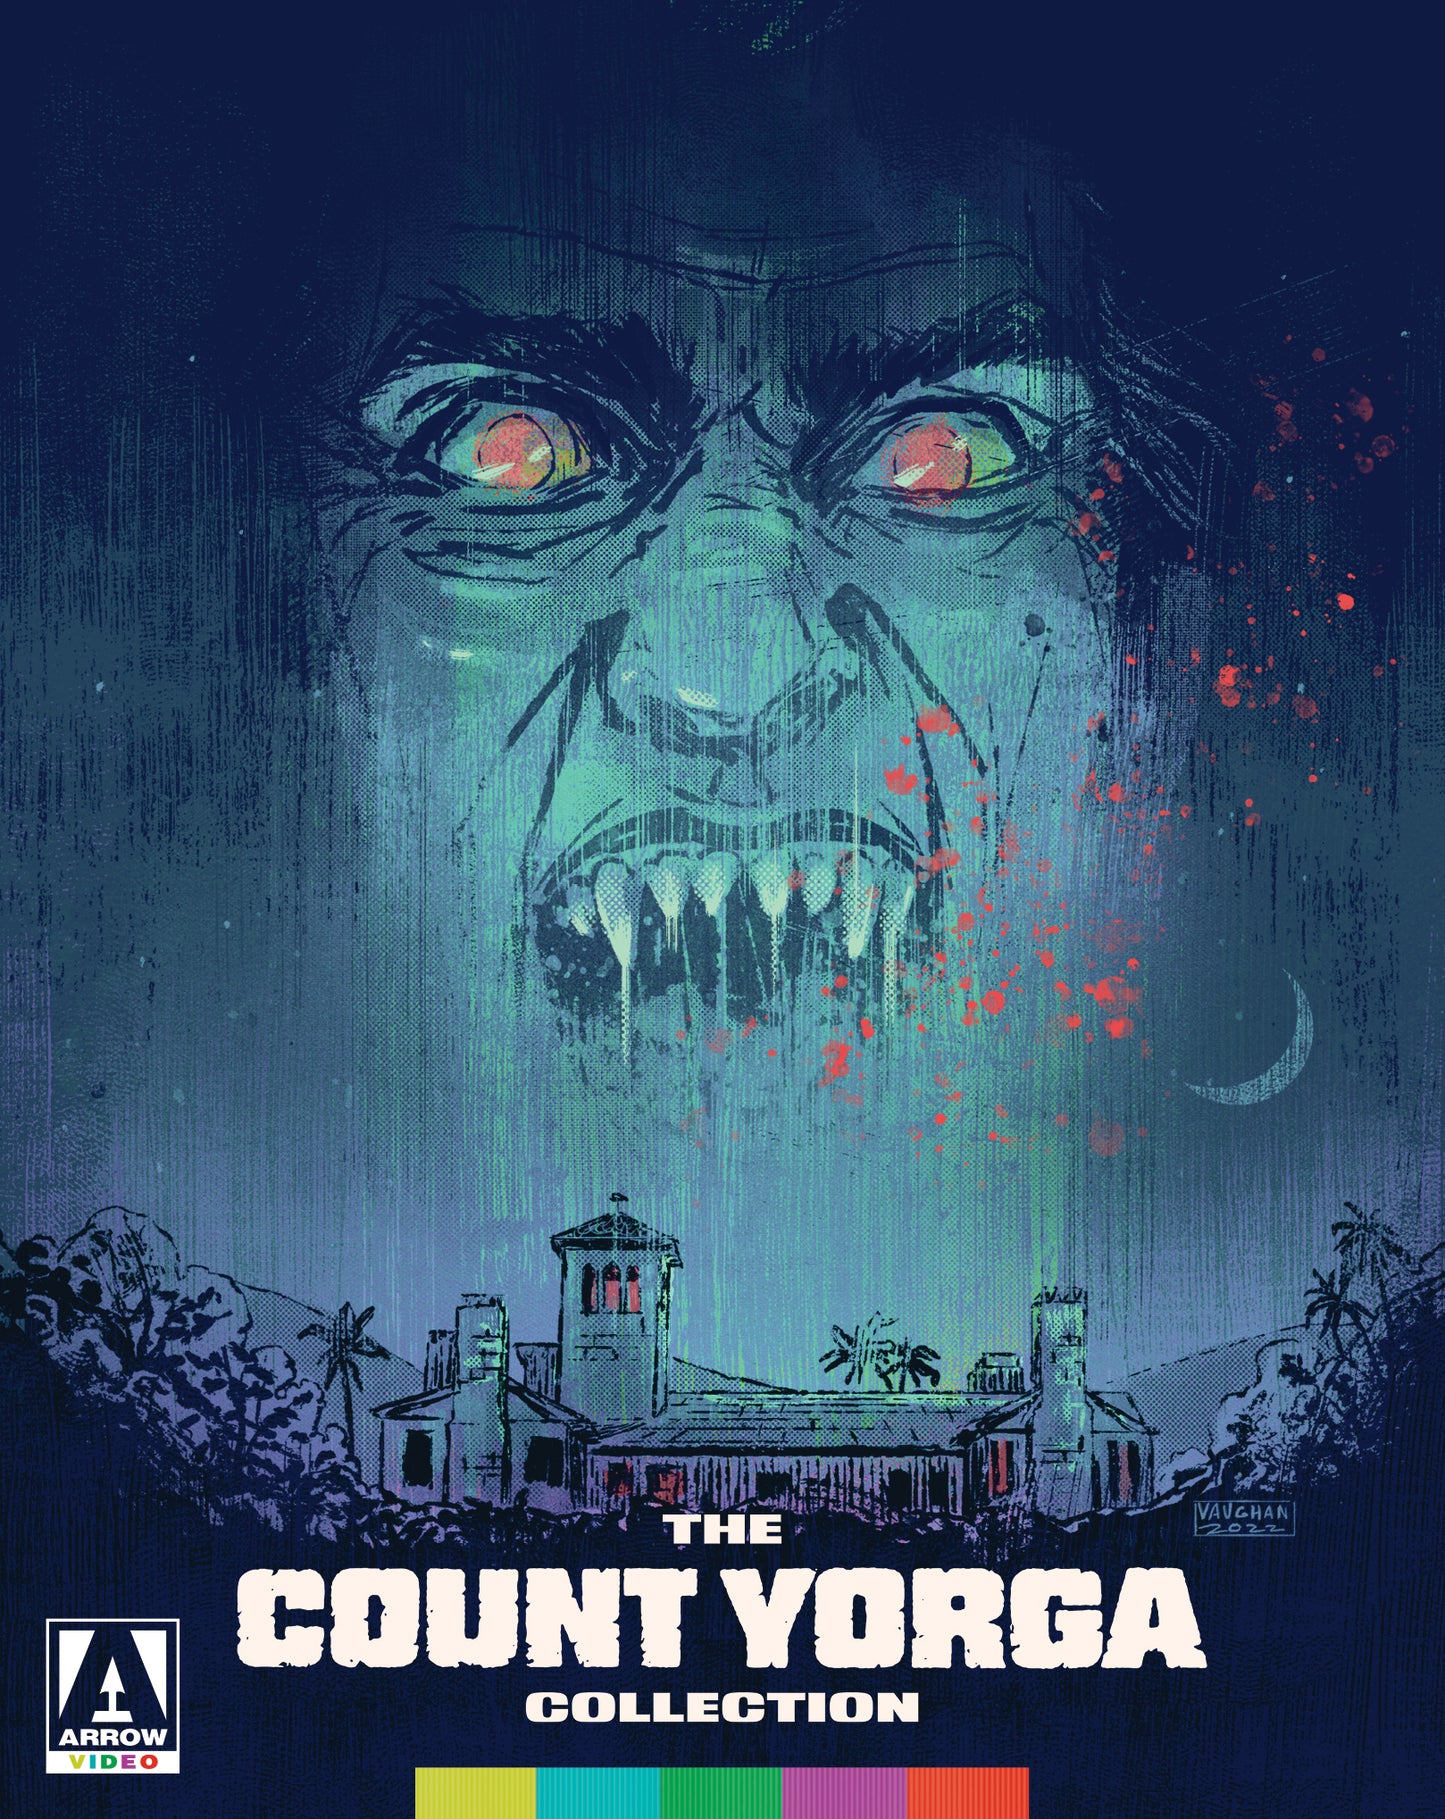 Count Yorga Collection Blu-ray Limited Edition (Arrow Video U.S.)